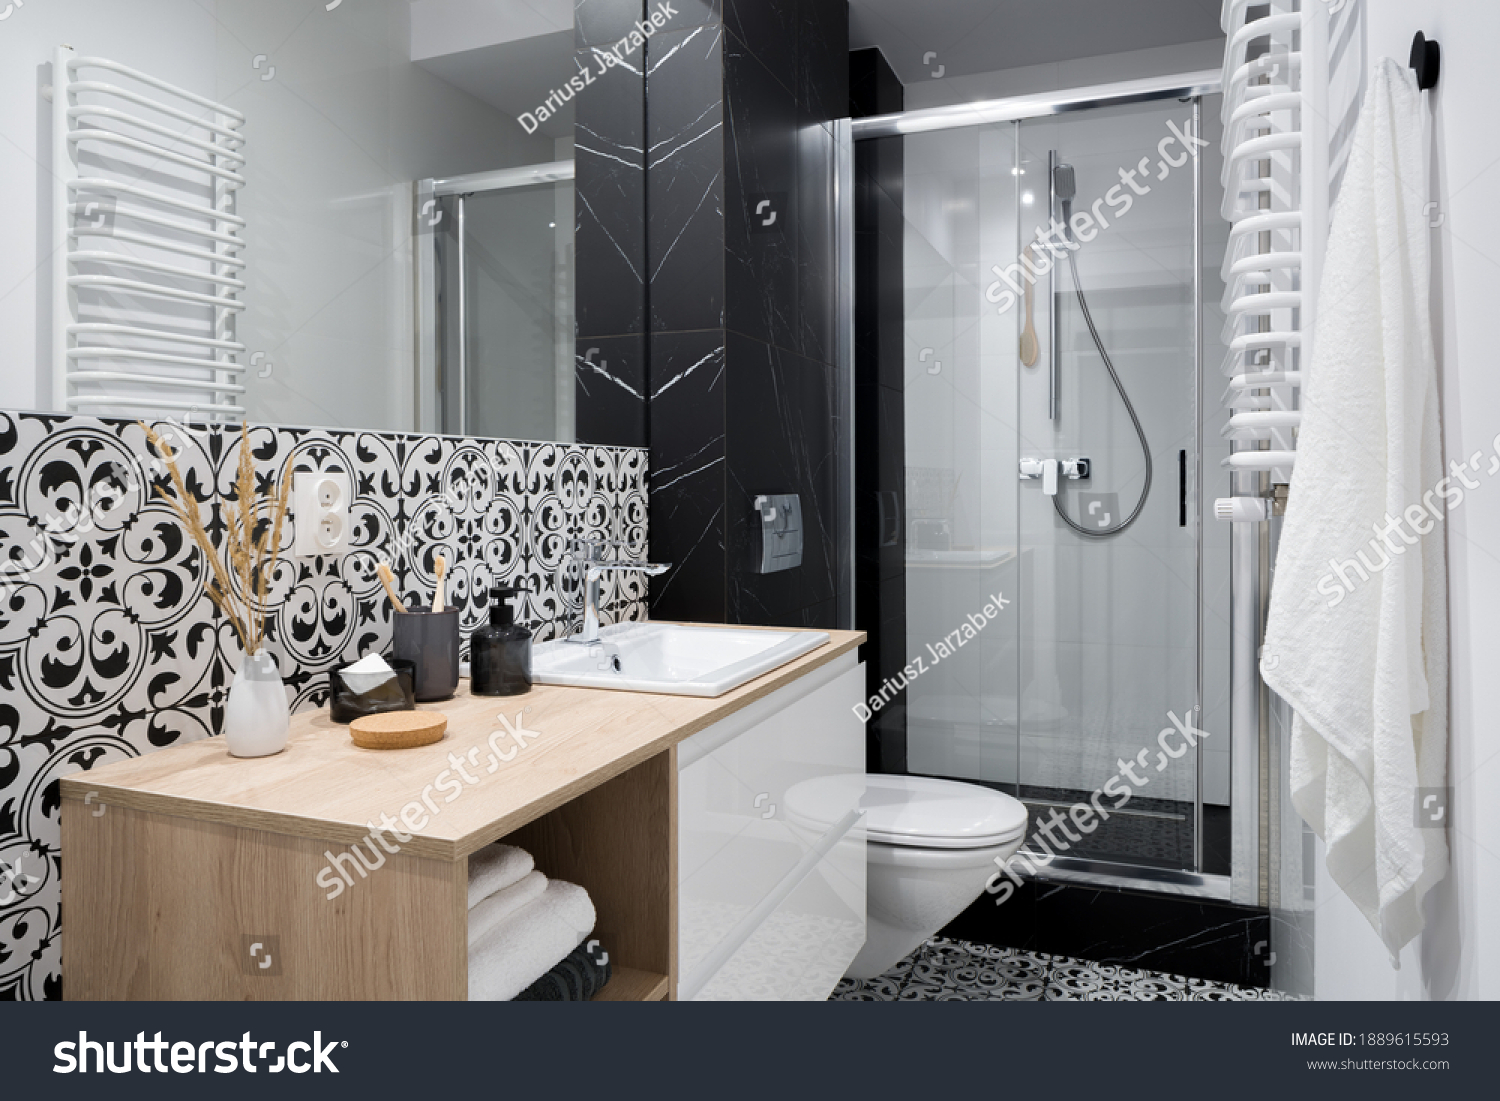 Stylish and small bathroom with decorative wall and floor tiles, big mirror and shower behind glass sliding doors #1889615593